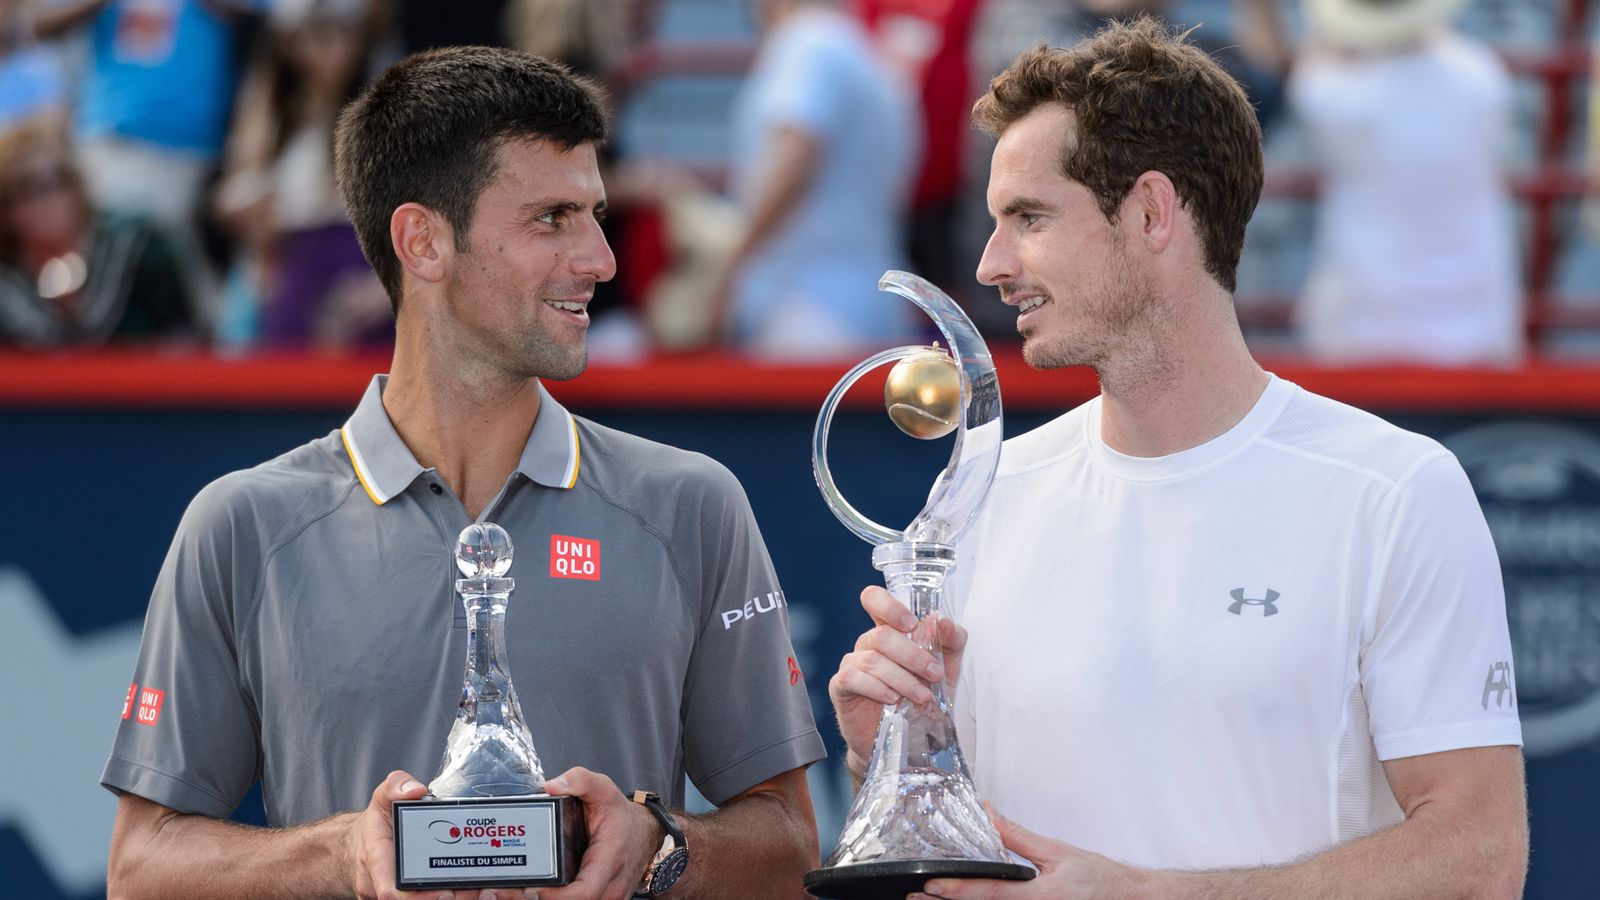 Novak Djokovic believes his serve cost him the Montreal Masters title Tennis News Sky Sports